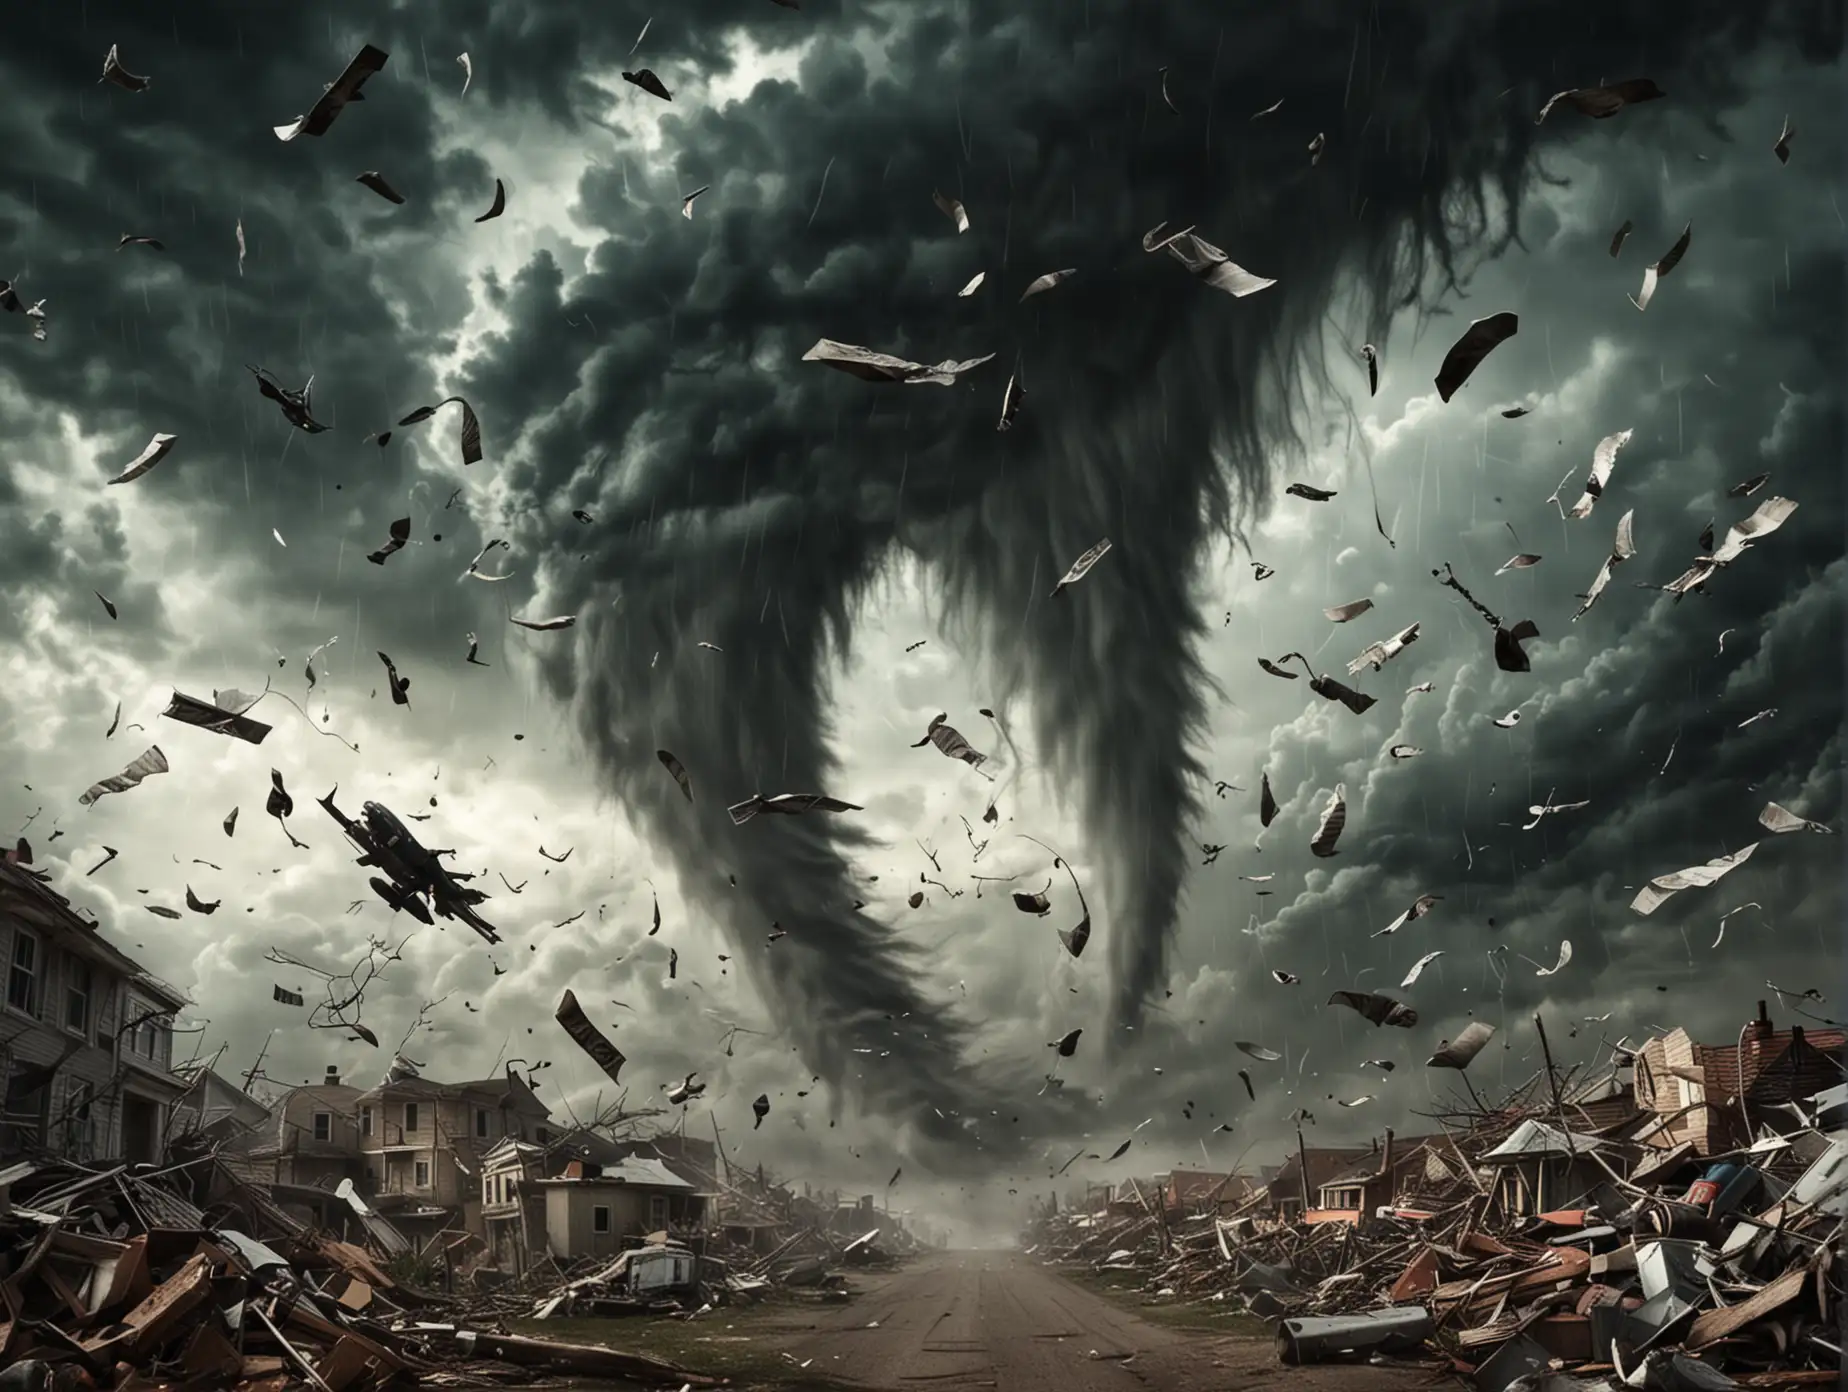 A tornado background with things flying around